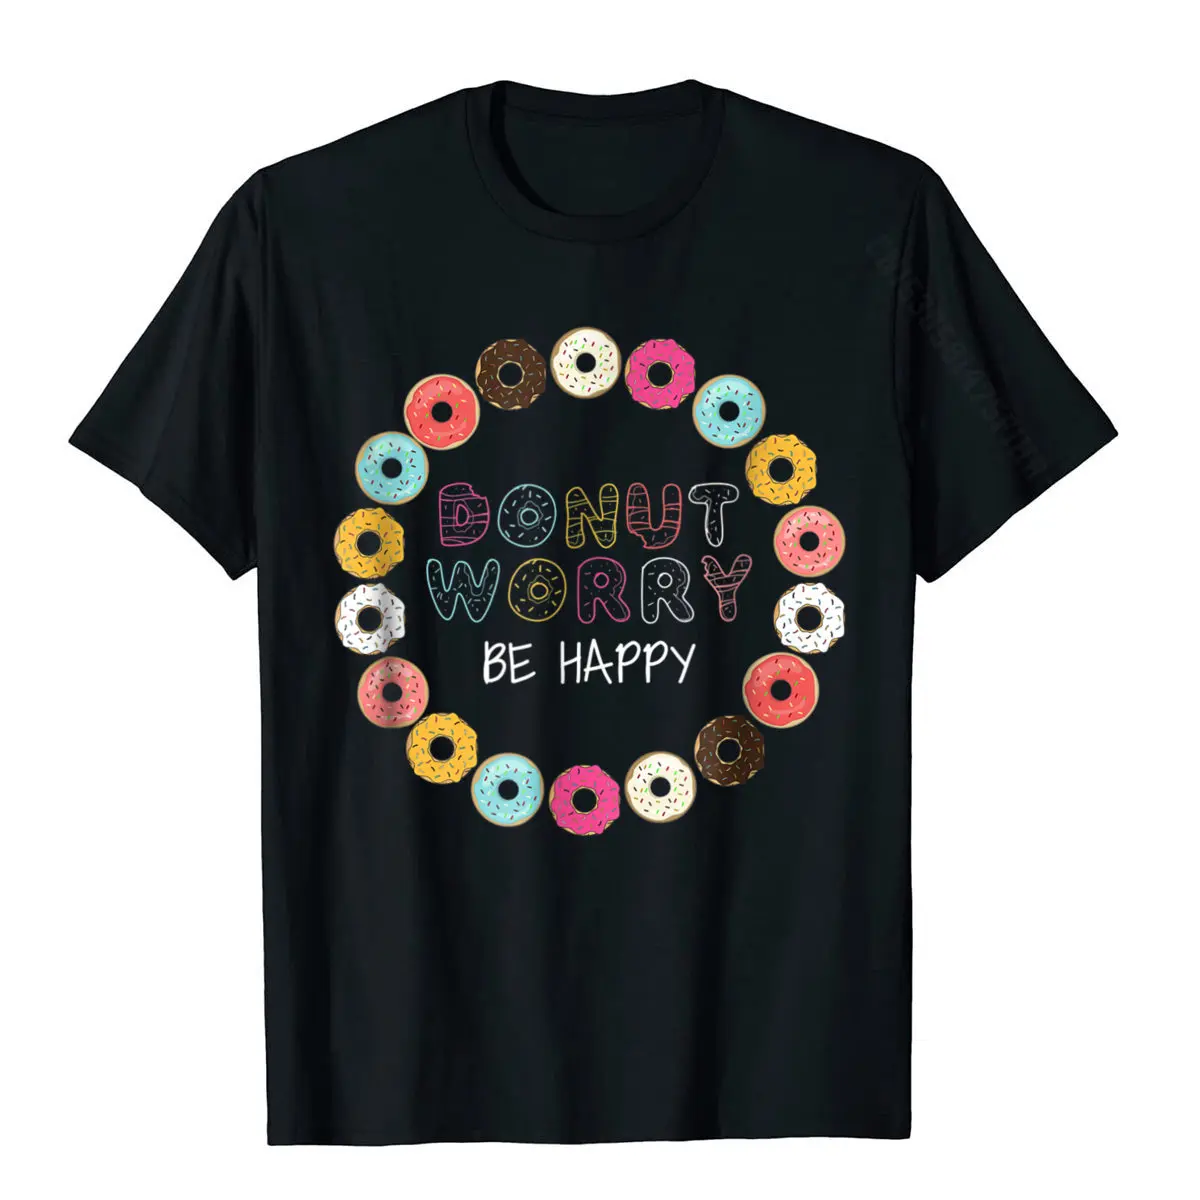 Donut Worry Be Happy Tshirt Funny Gift T Shirt Men Women Kid Cotton Young T Shirts Normal Tops Tees Funky Design